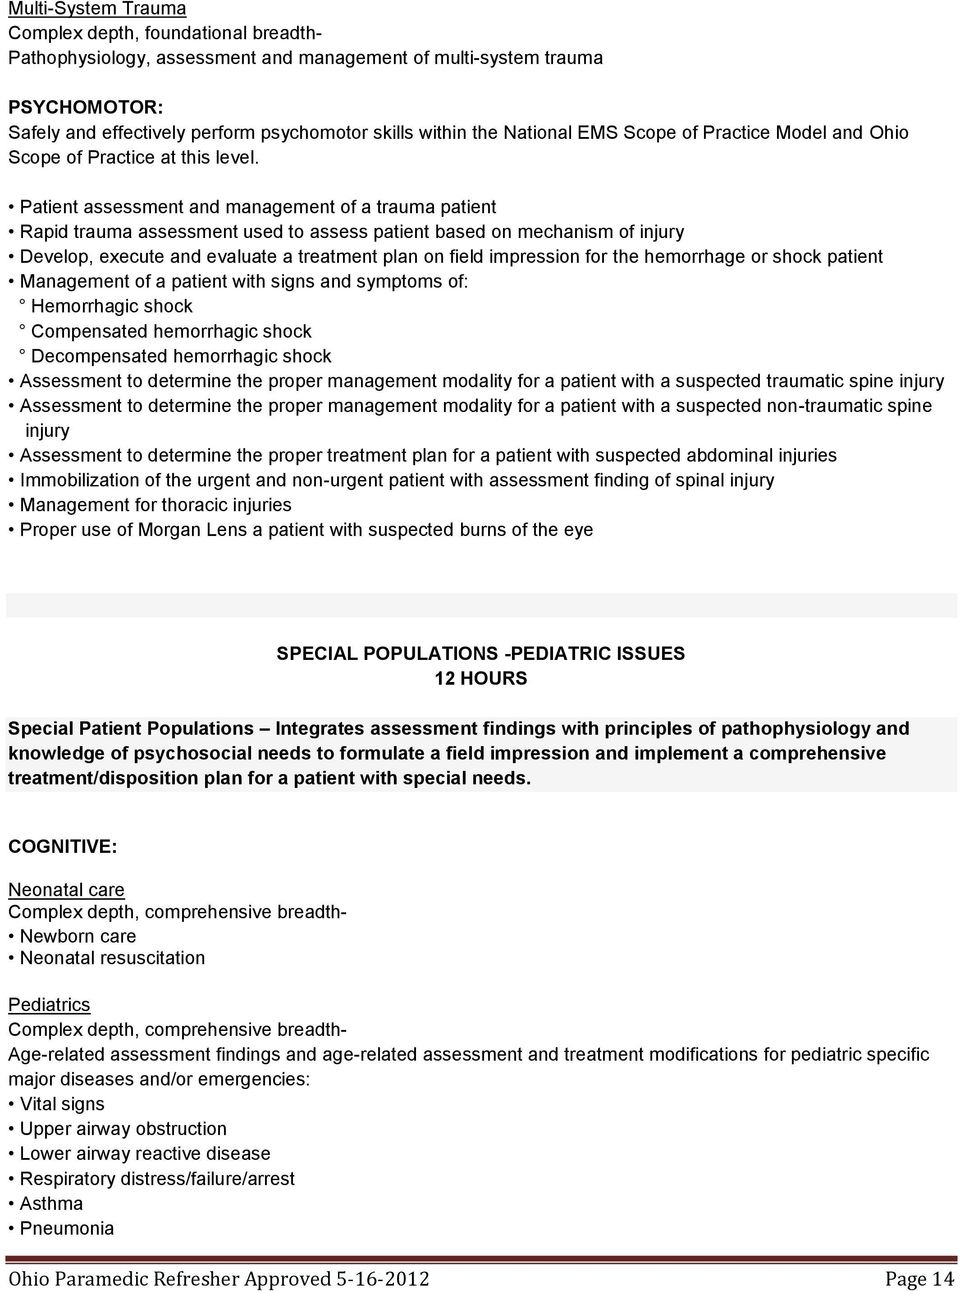 Patient assessment and management of a trauma patient Rapid trauma assessment used to assess patient based on mechanism of injury Develop, execute and evaluate a treatment plan on field impression